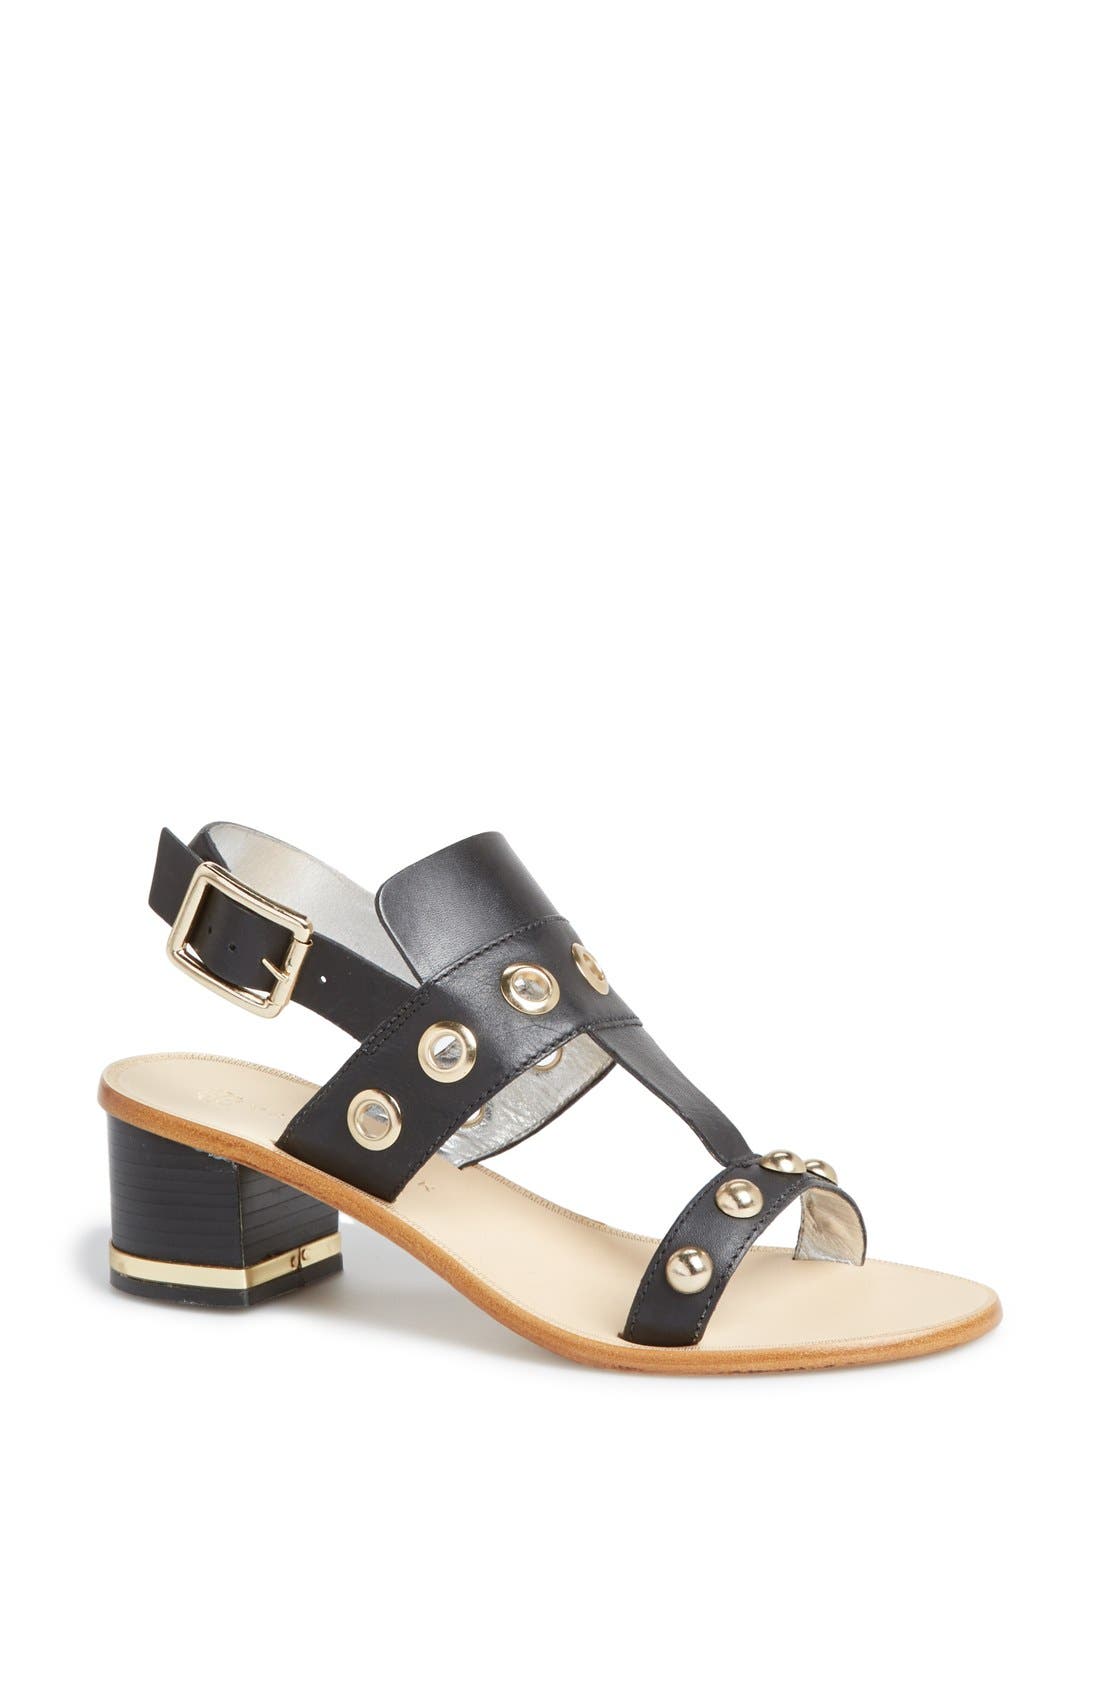 trina turk shoes nordstrom